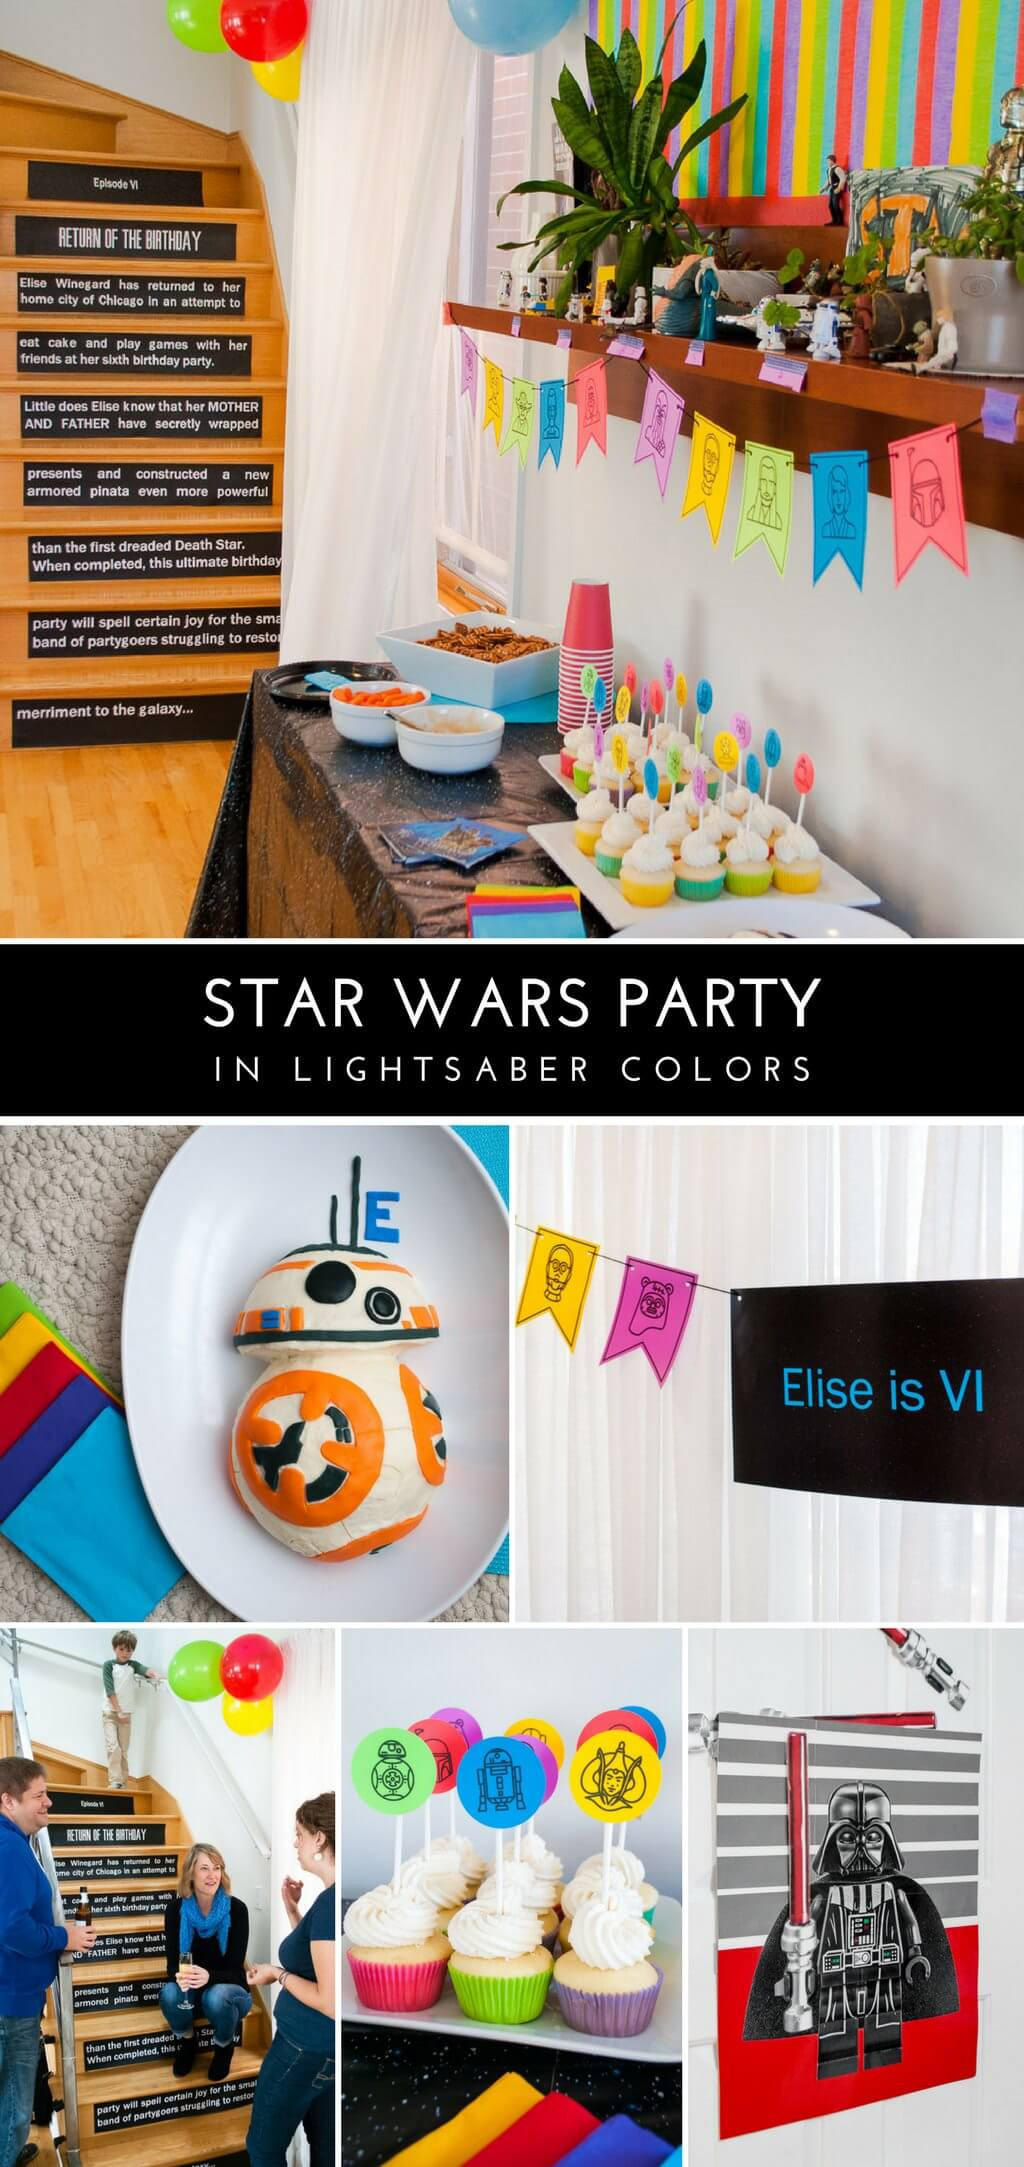 Star Wars Birthday Party Ideas
 Star Wars Birthday Party in Lightsaber Colors